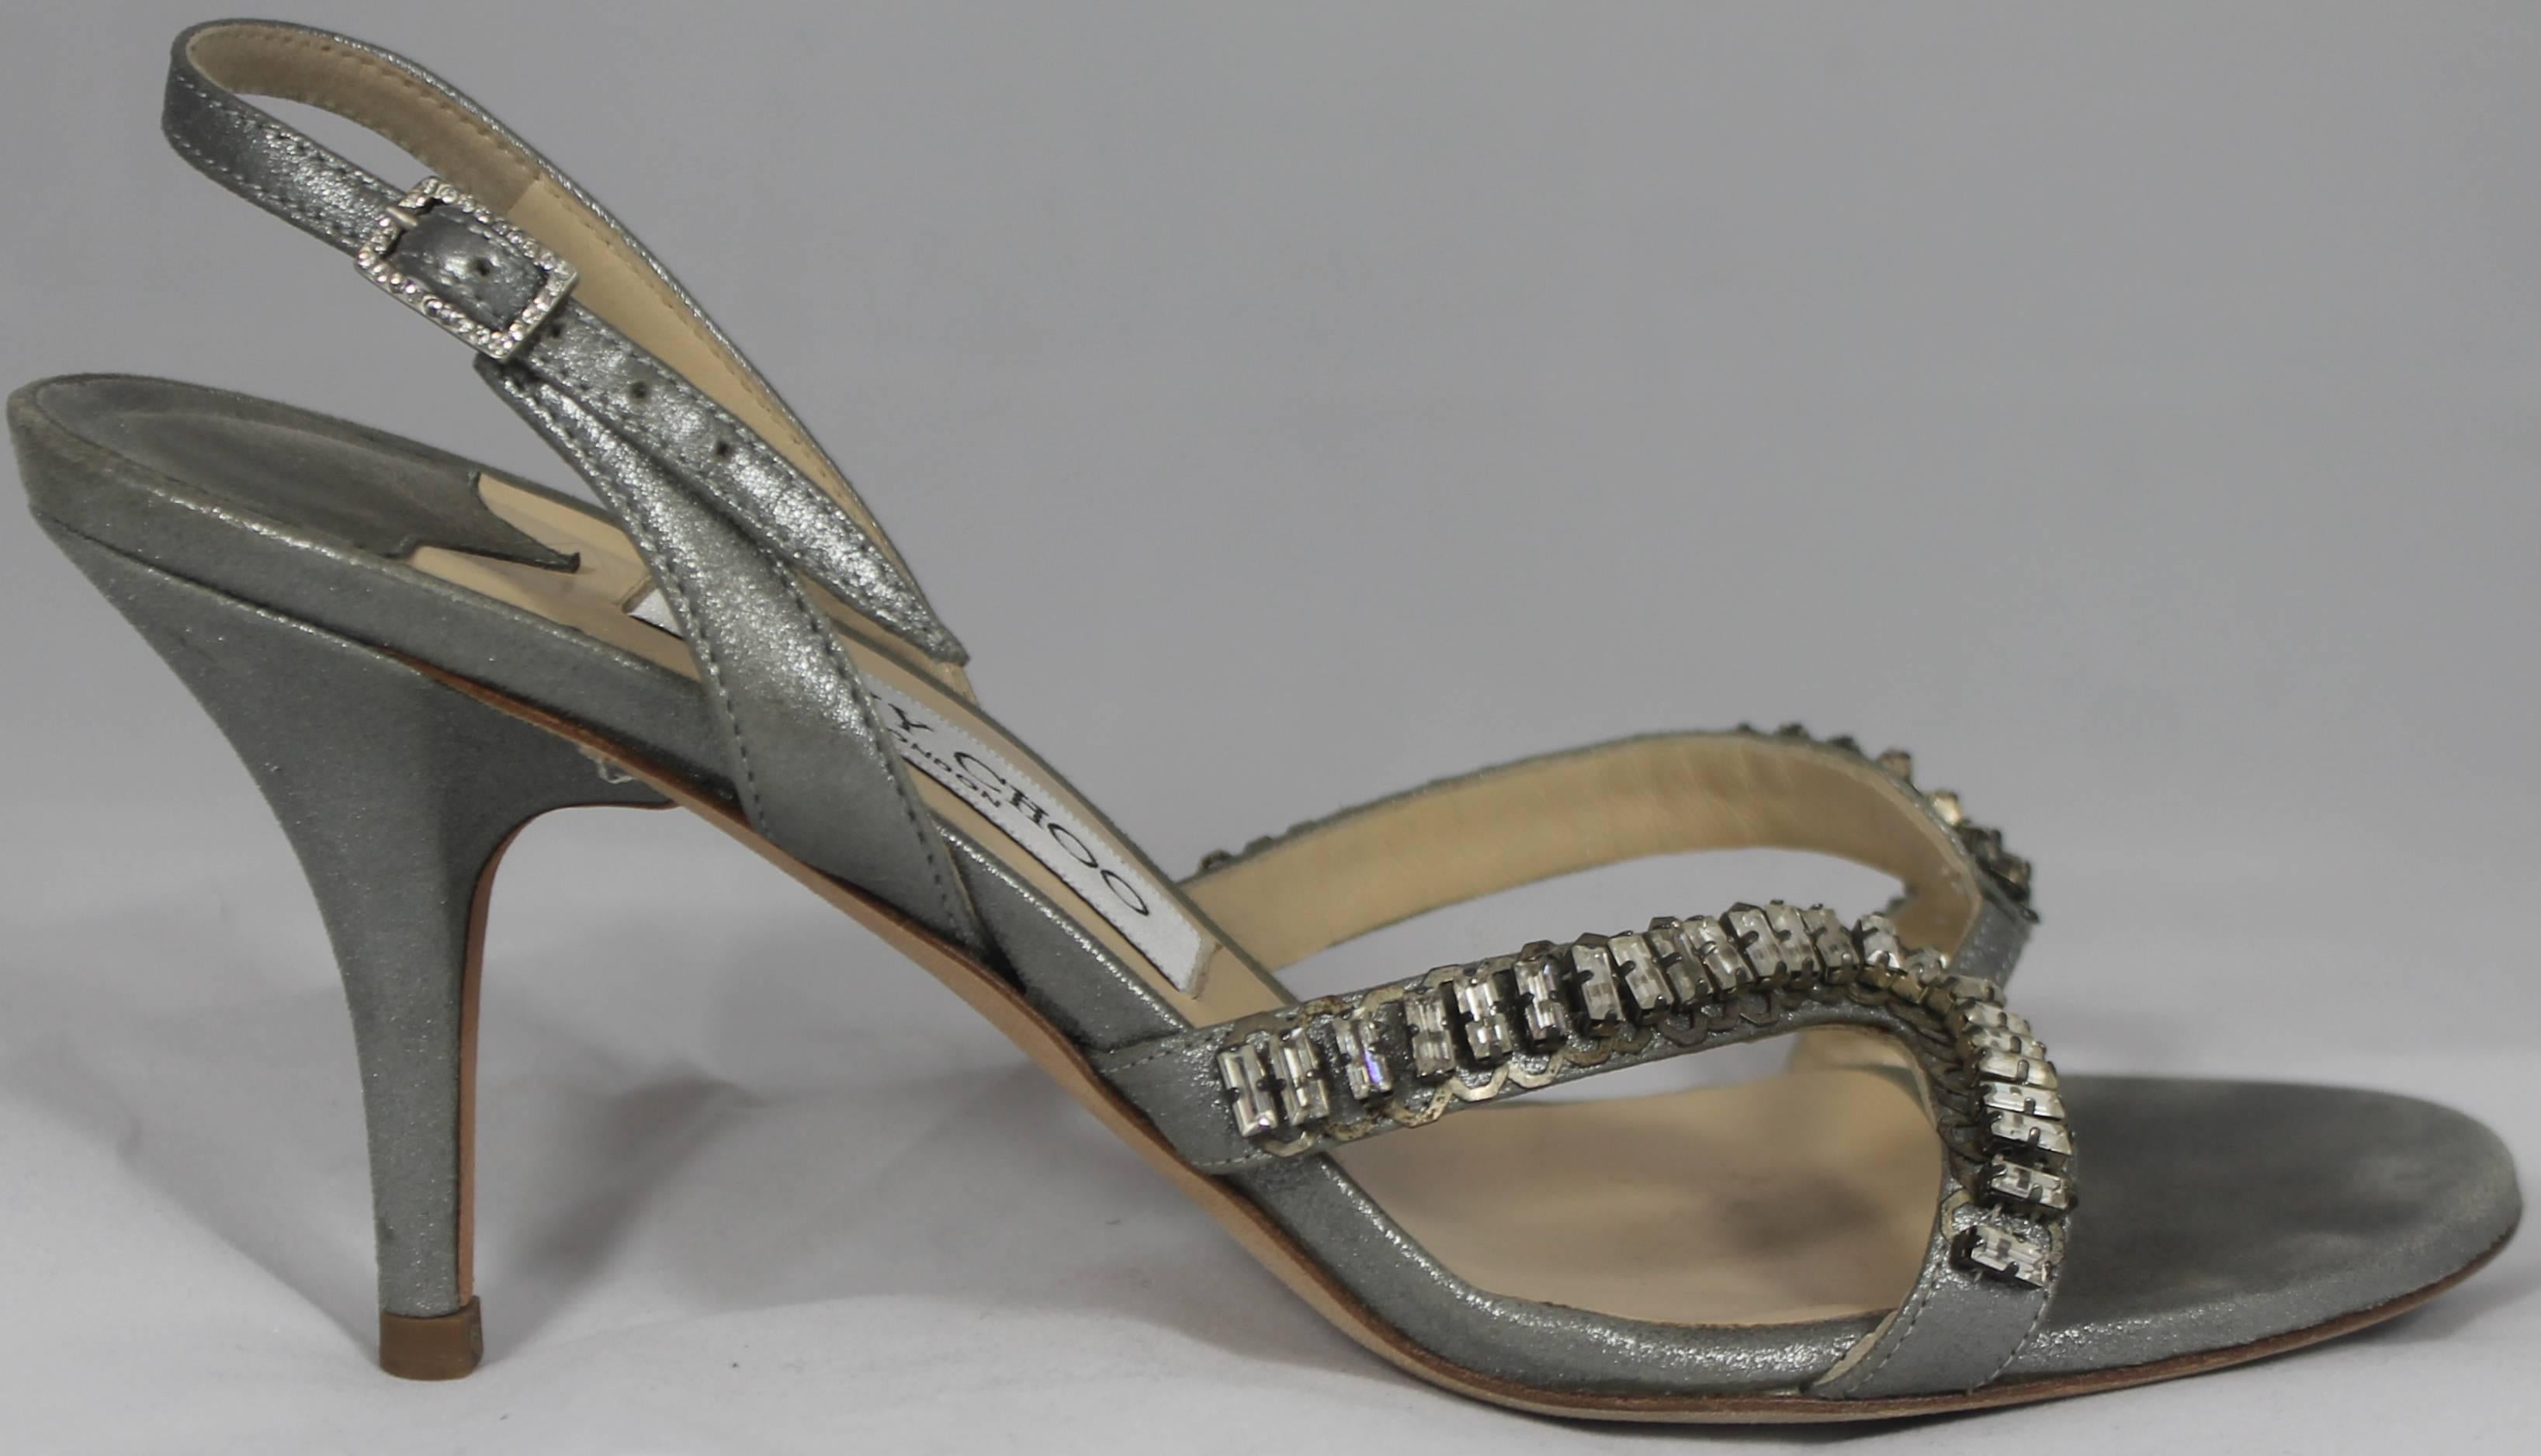 Jimmy Choo Shimmery Silver Slingback Heels with Bedazzlement - 37. These heels have a shimmery silver color. On the slingback, there is a rhinestone buckle. The front of the shoes have 2 straps that are covered in rhinestone beads. They are in good